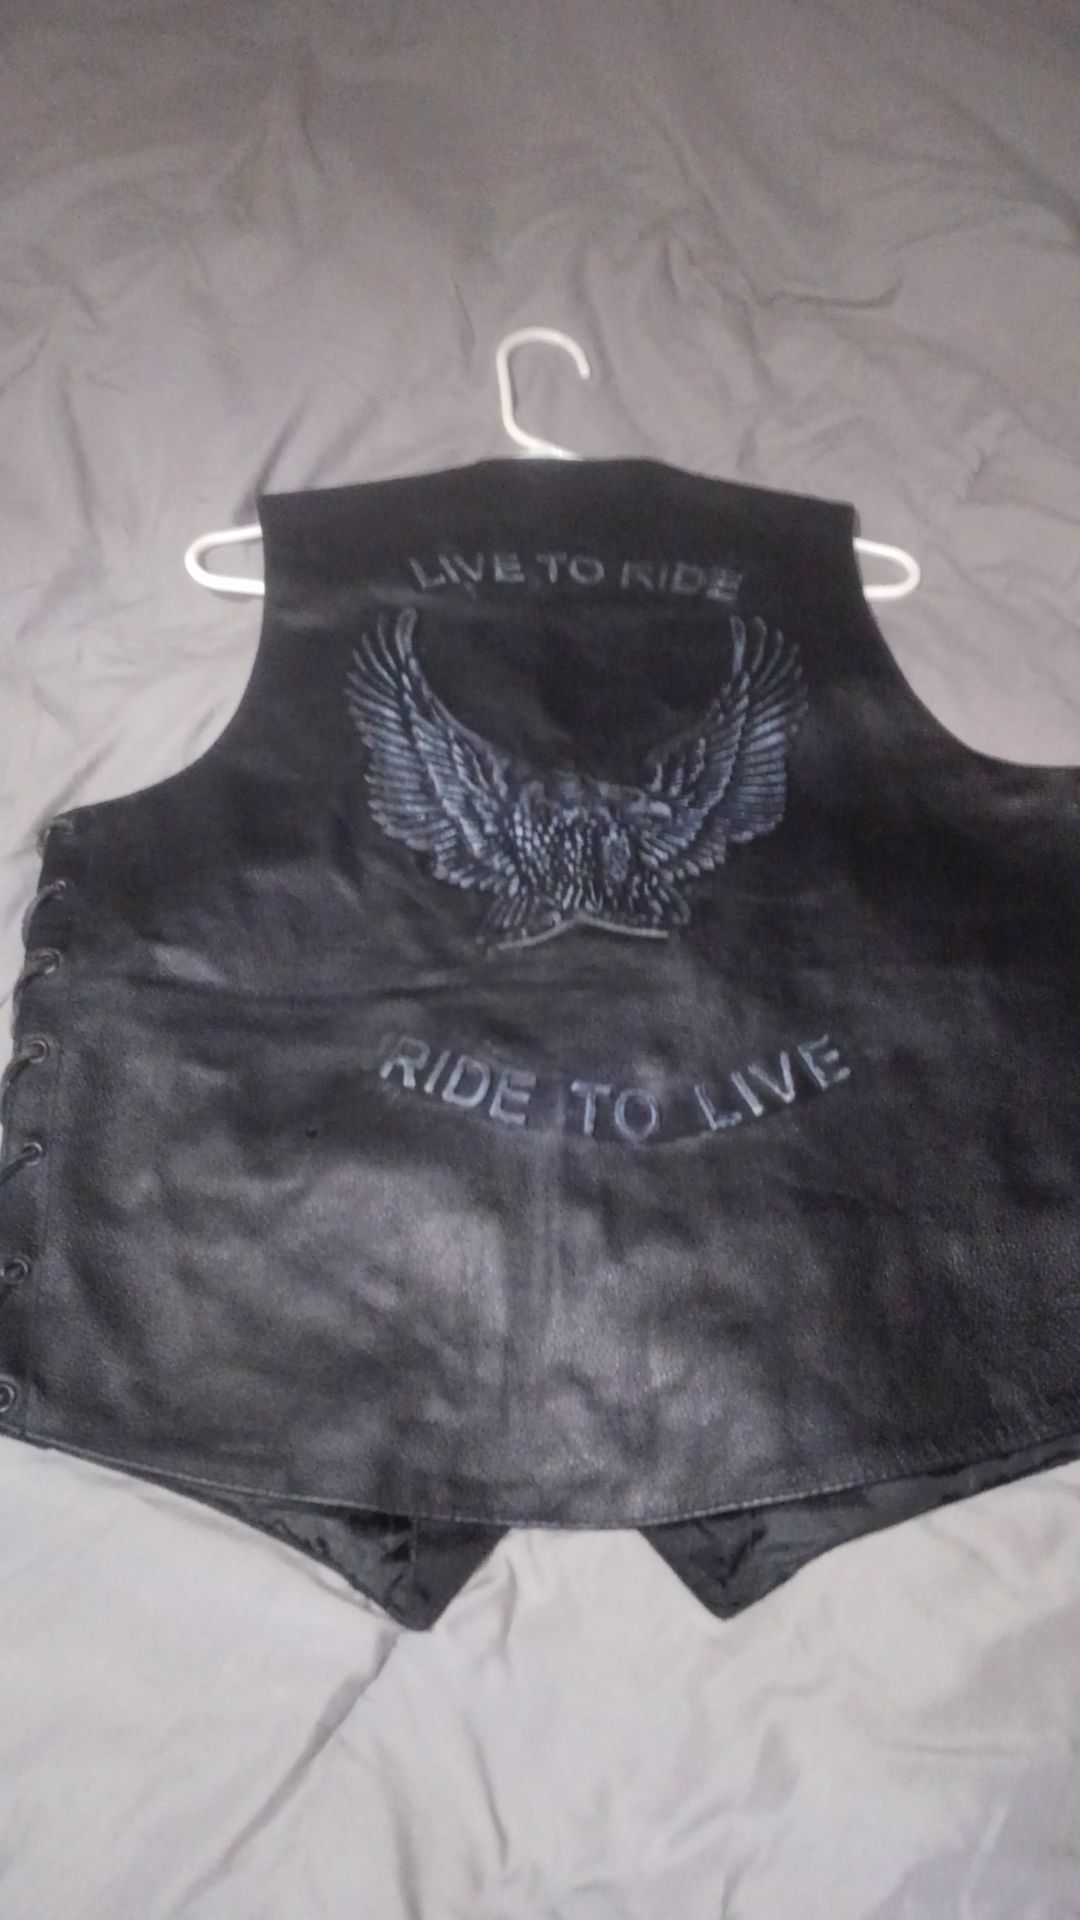 Leather motorcycle vest